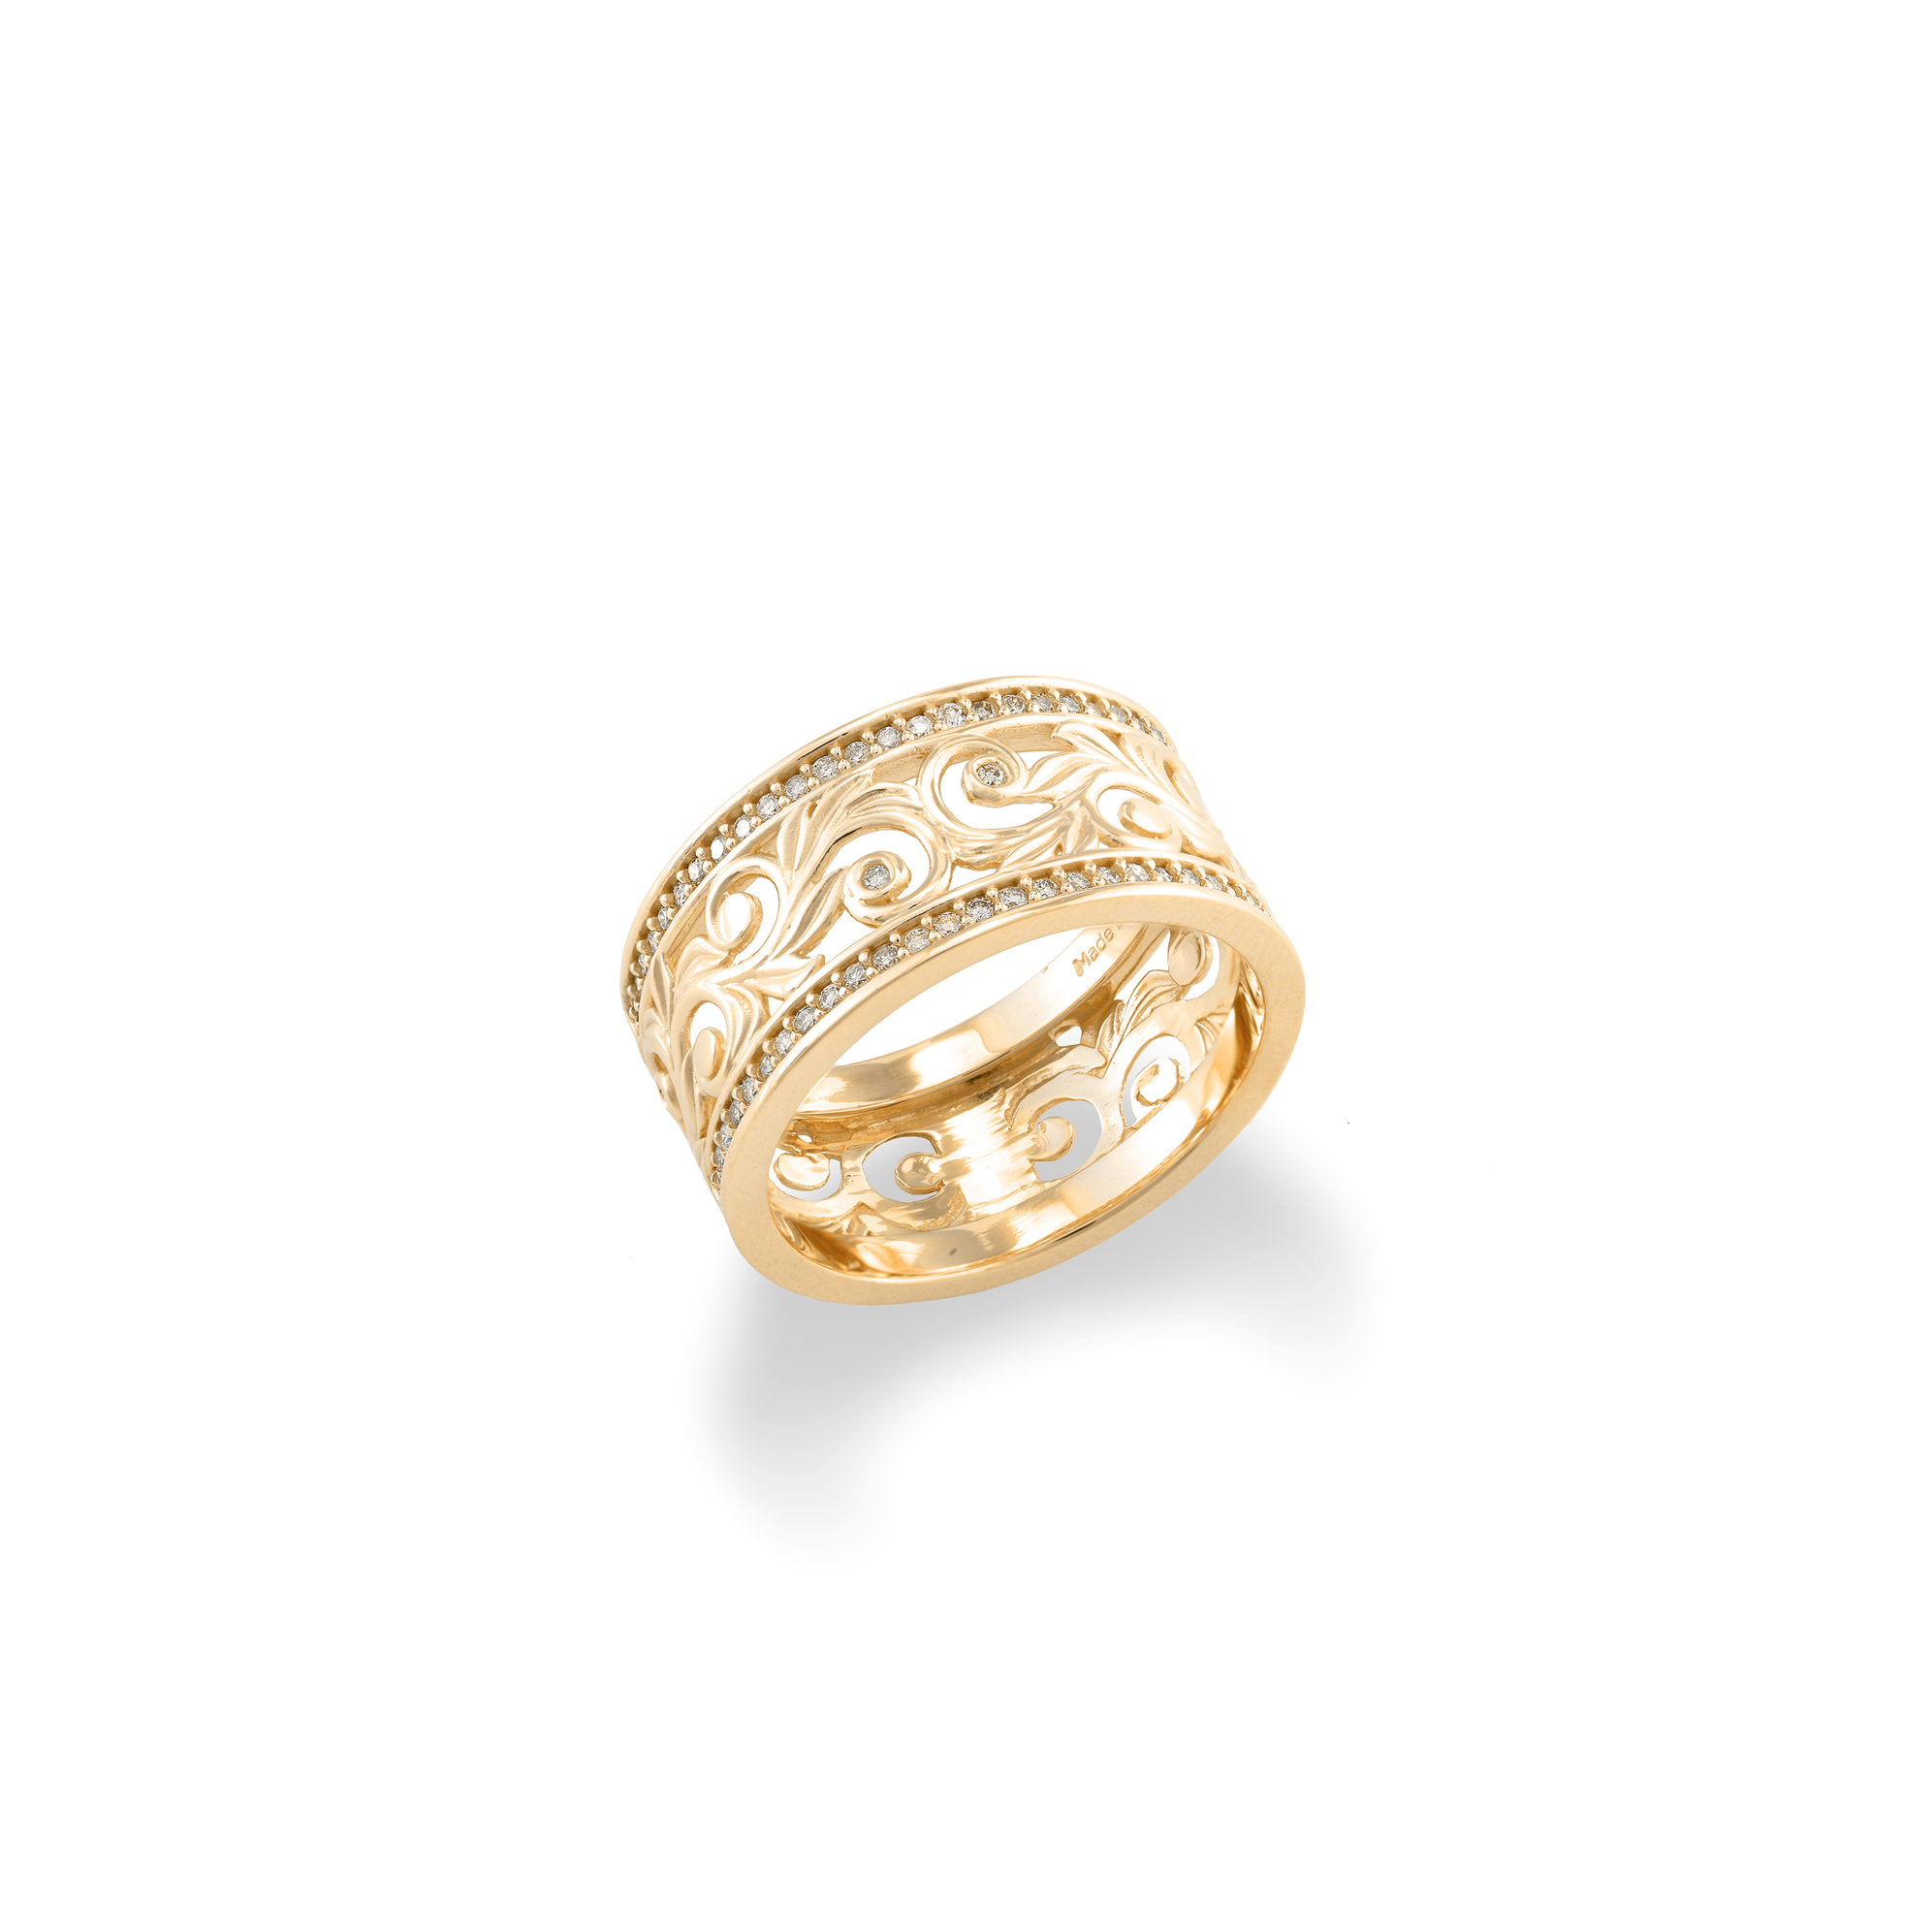 Living Heirloom Ring in Gold with Diamonds - 10mm